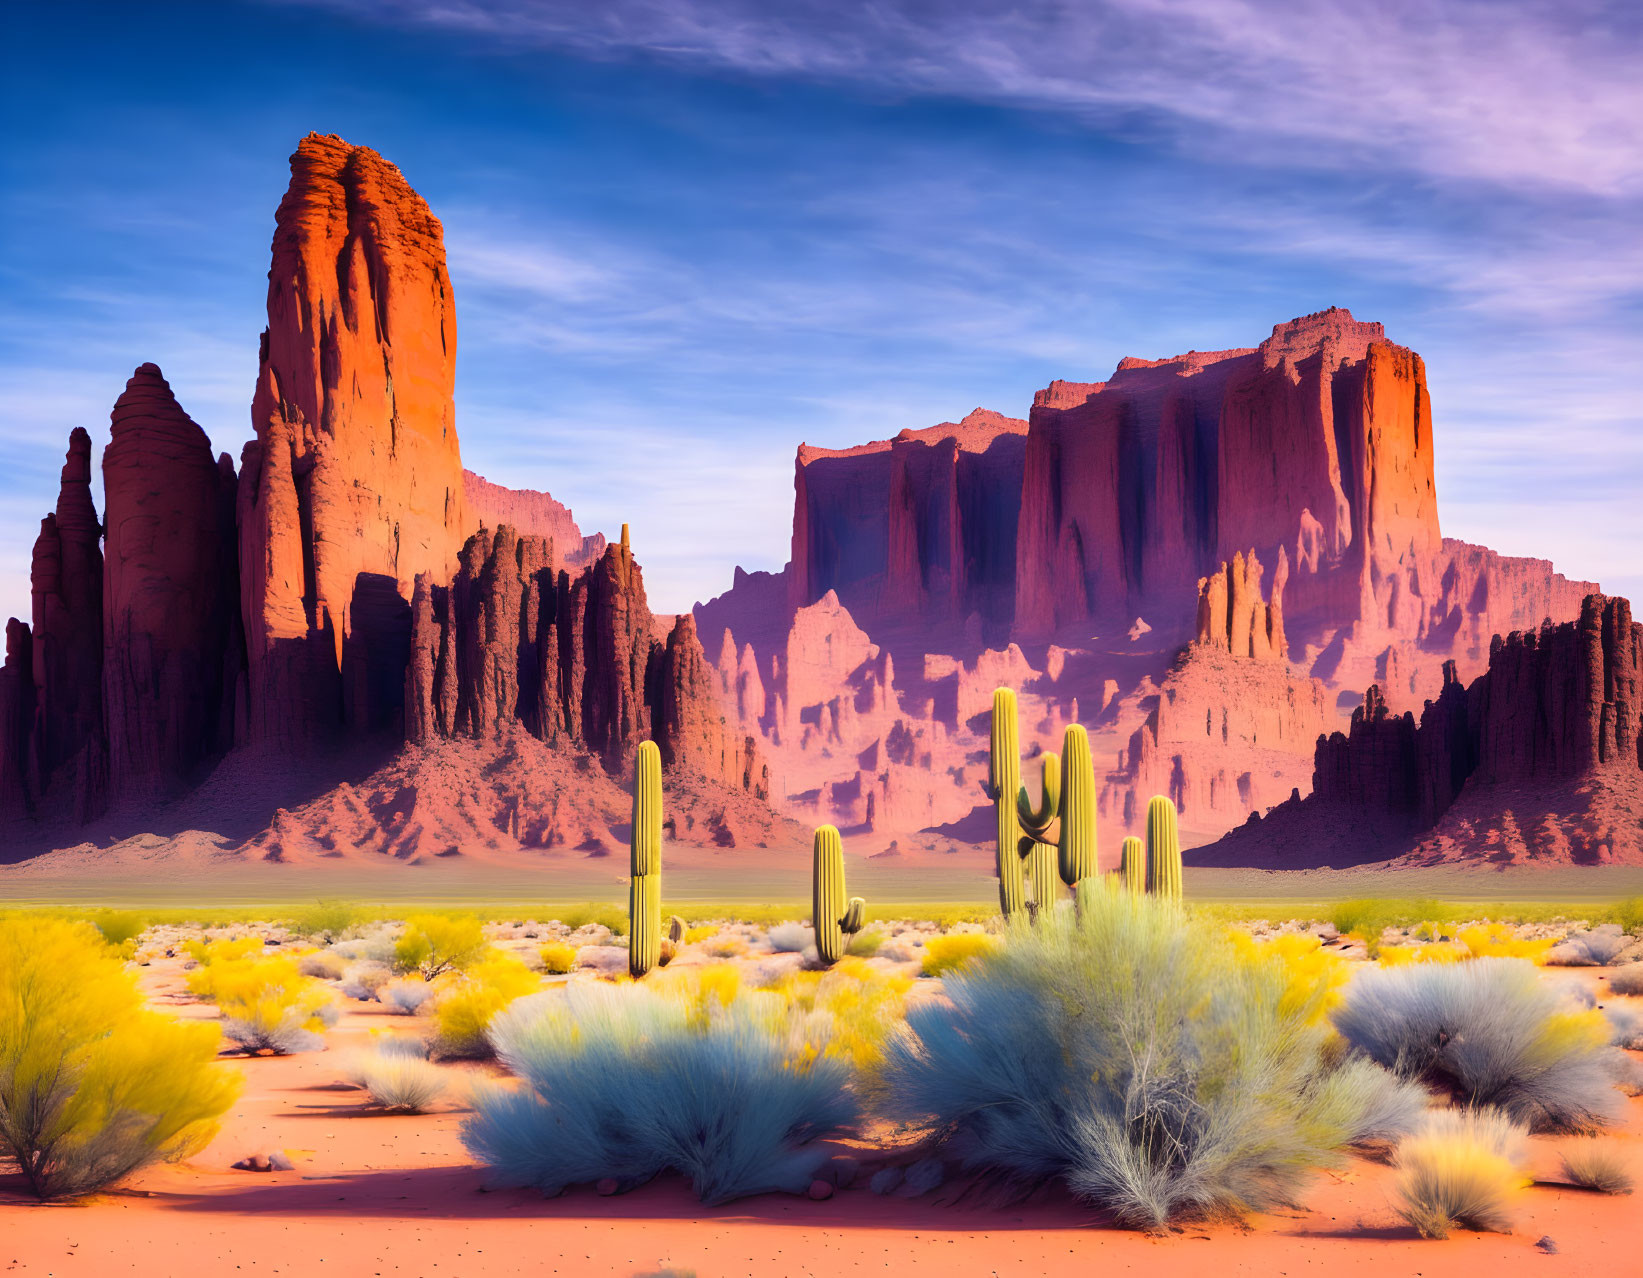 Desert landscape with red rock formations and cacti